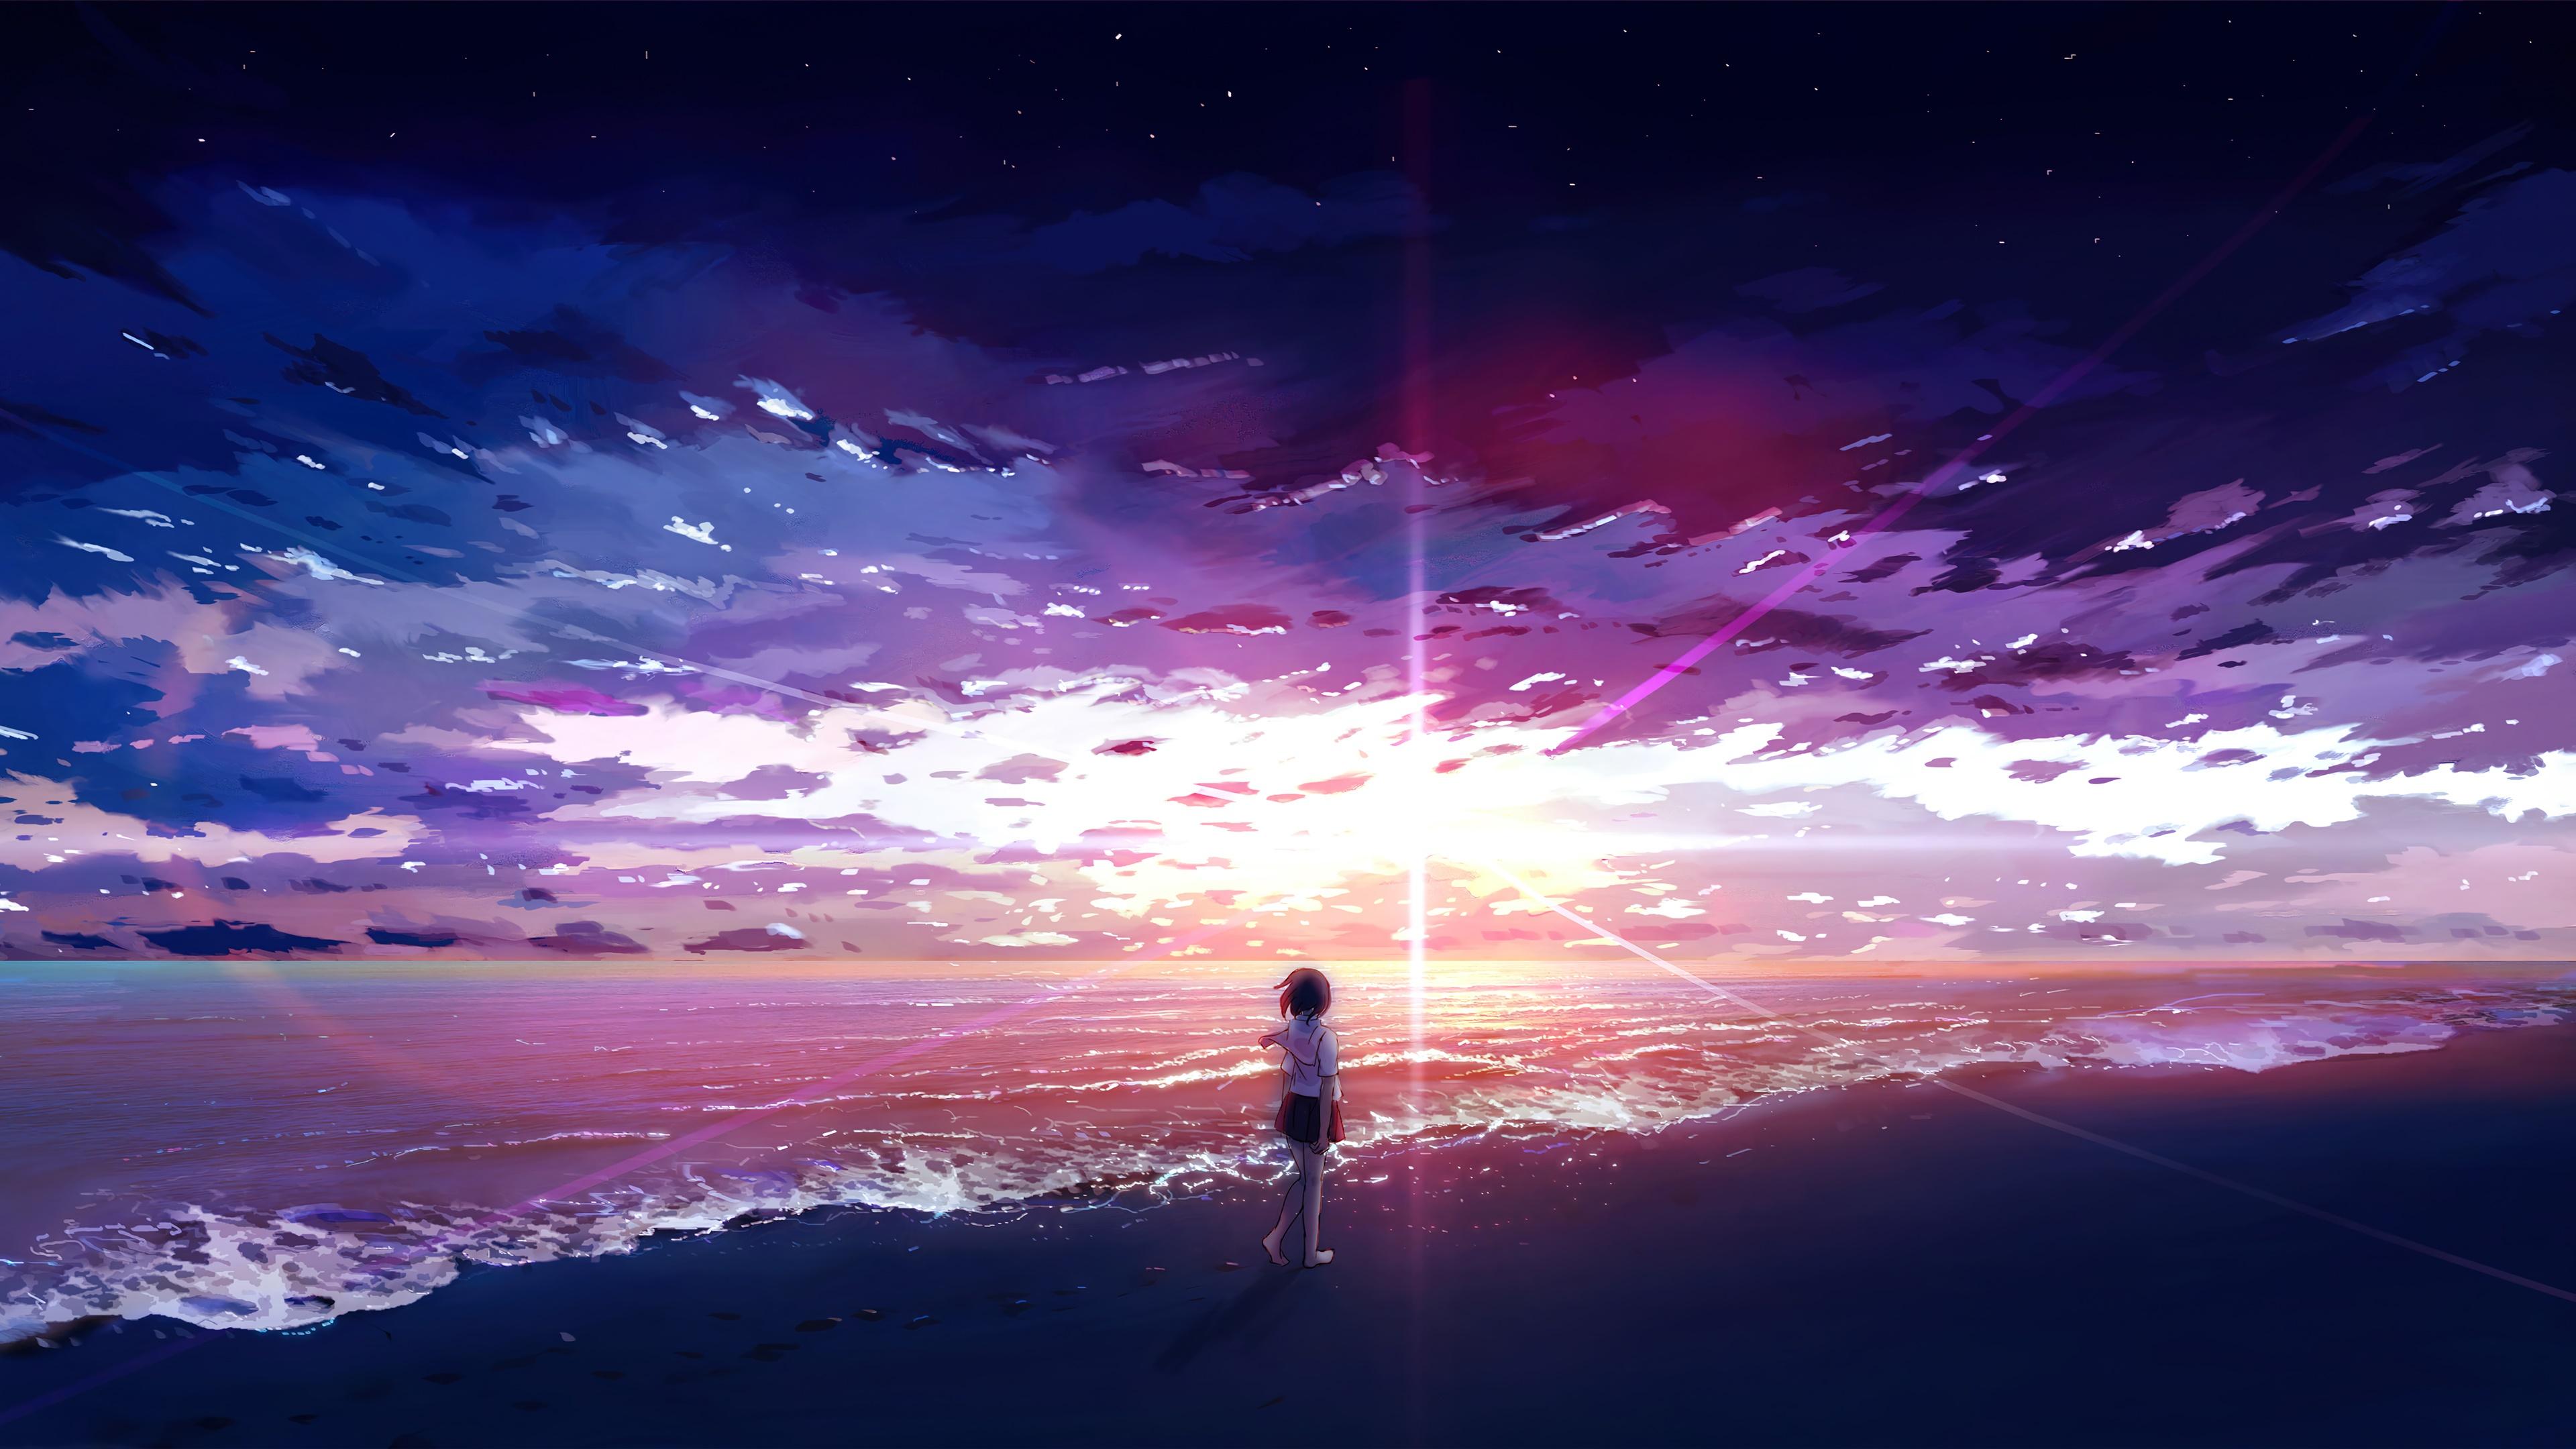 Anime Environment Wallpapers - Top Free Anime Environment Backgrounds ...